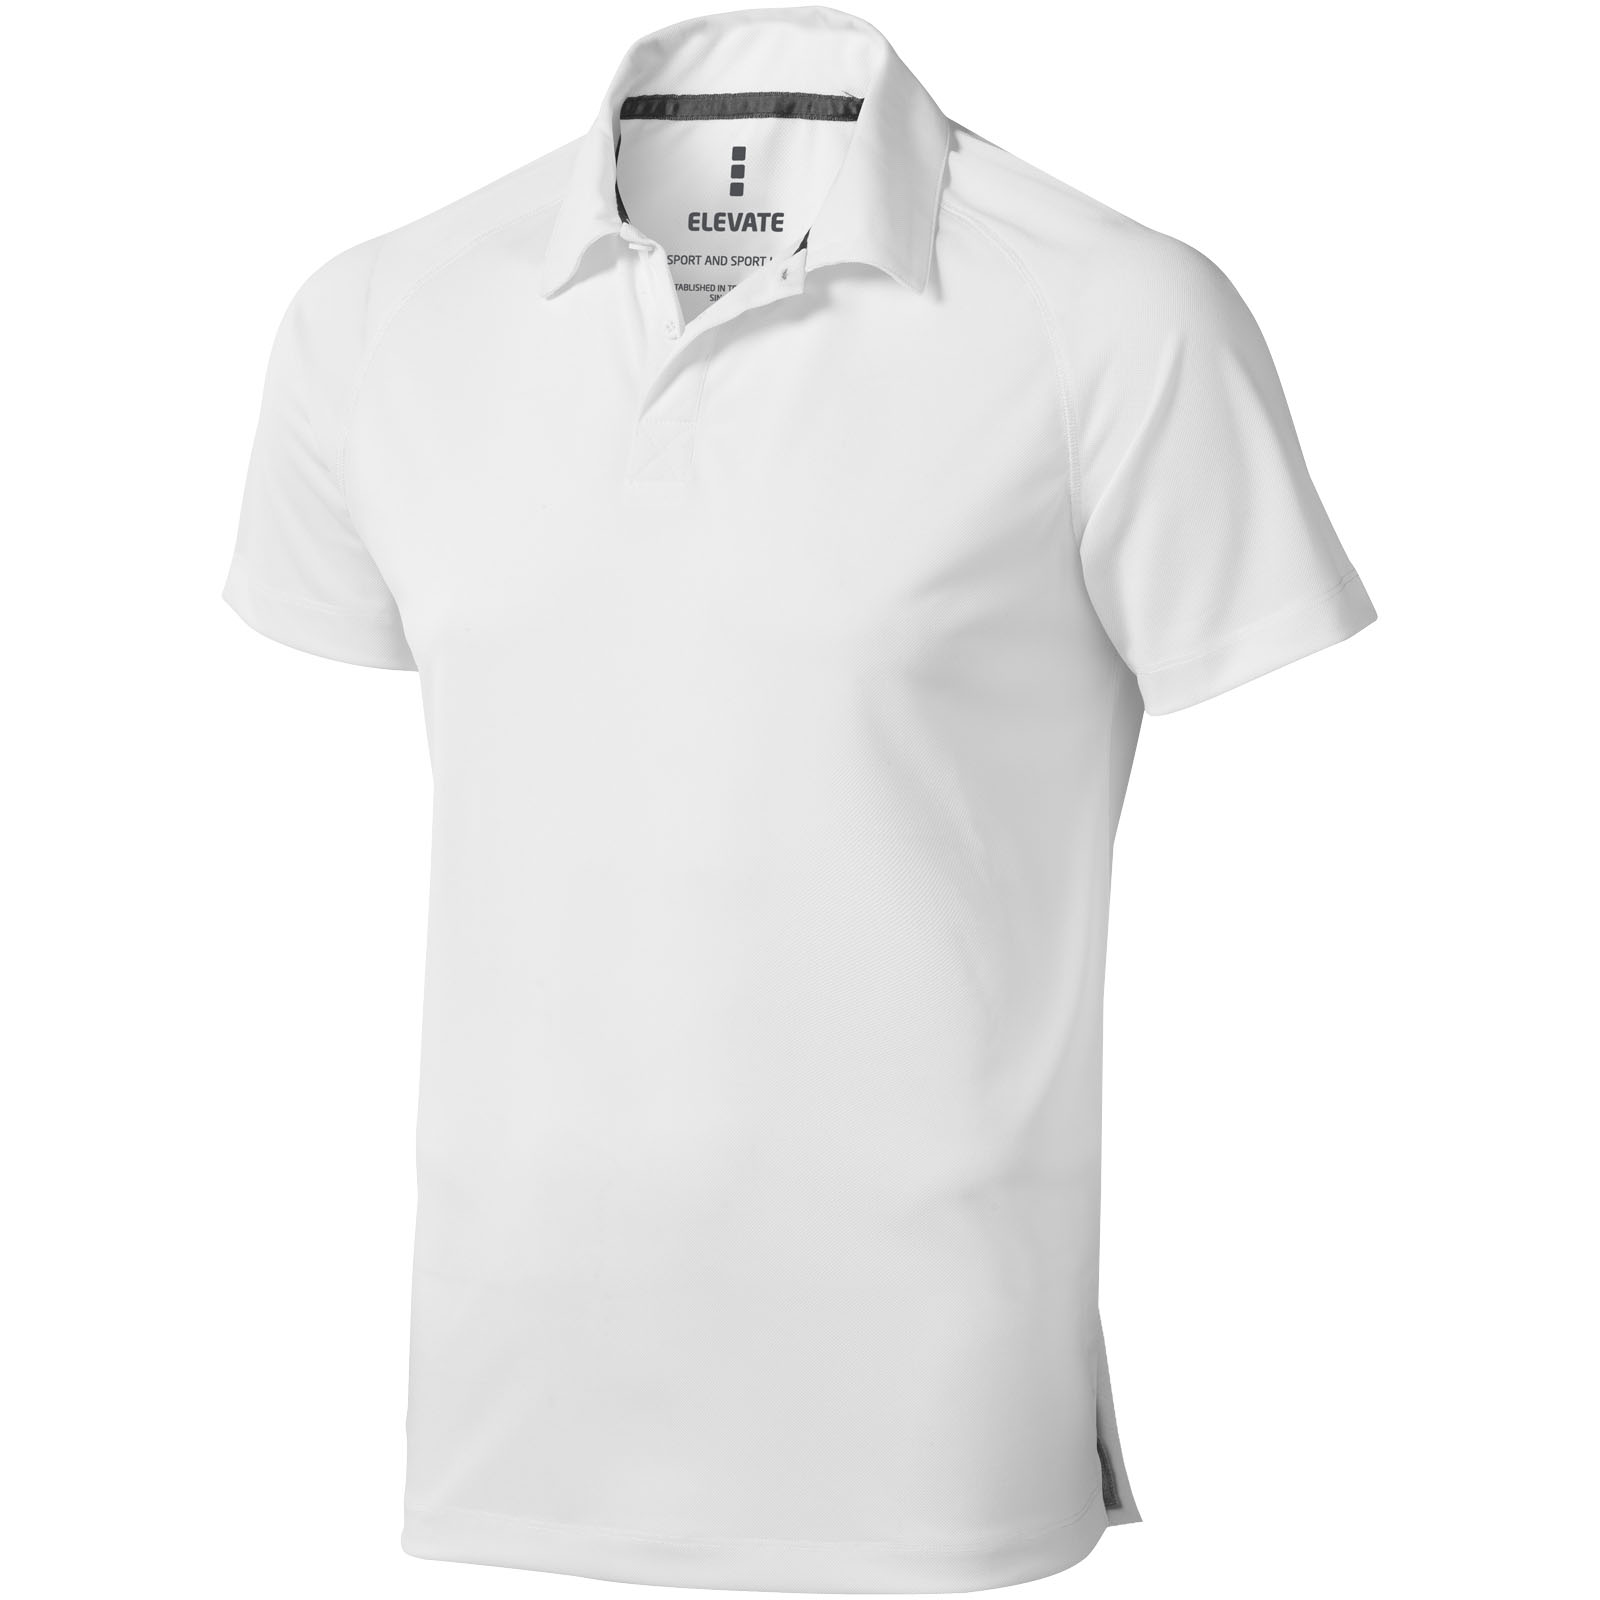 Clothing - Ottawa short sleeve men's cool fit polo